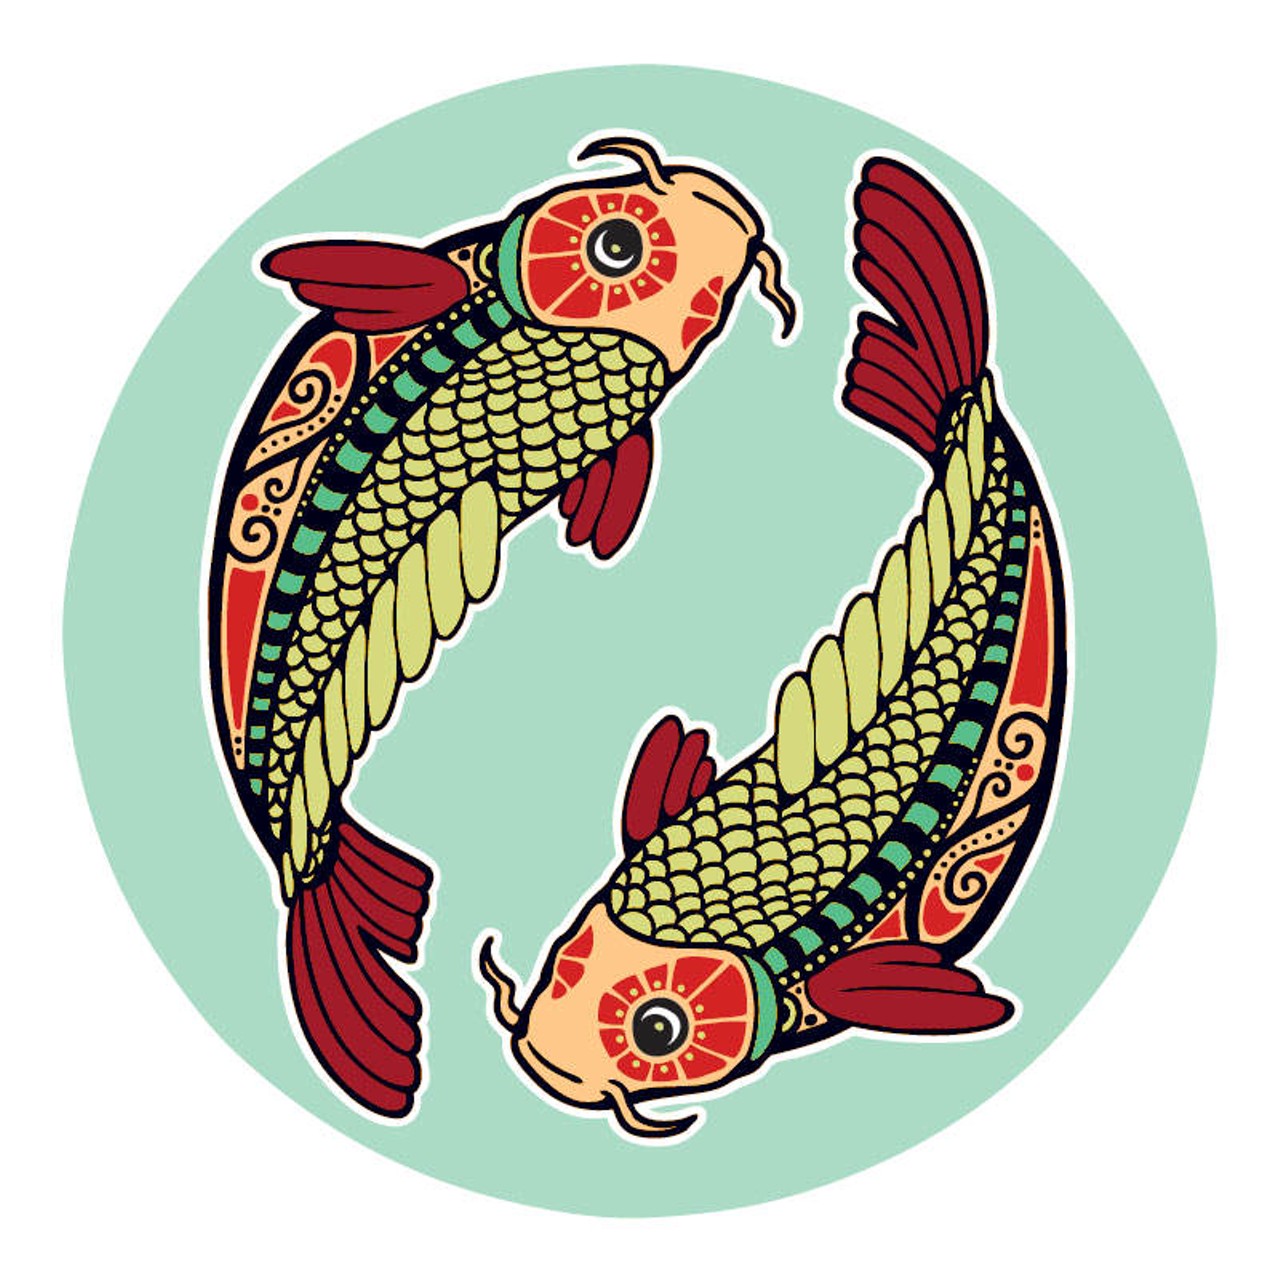 PISCES (Feb. 21-March 20): 
Now that everything is at stake, the ones who want a piece of it are crawling out of the walls. You&#146;ve seen this before. You have your Ph.D. in situations like this. At this point your only weak spot rests in the need for higher levels of discernment. If you think you&#146;re immune, guess again. Anyone with half a brain could get your number and play you as easily as the next person. Open eyes are essential. The worm in the apple is hard to see until you reach the core. With all the BS and conning you&#146;ve got going on, it&#146;s time to turn on the shit detector and let it run, full blast.